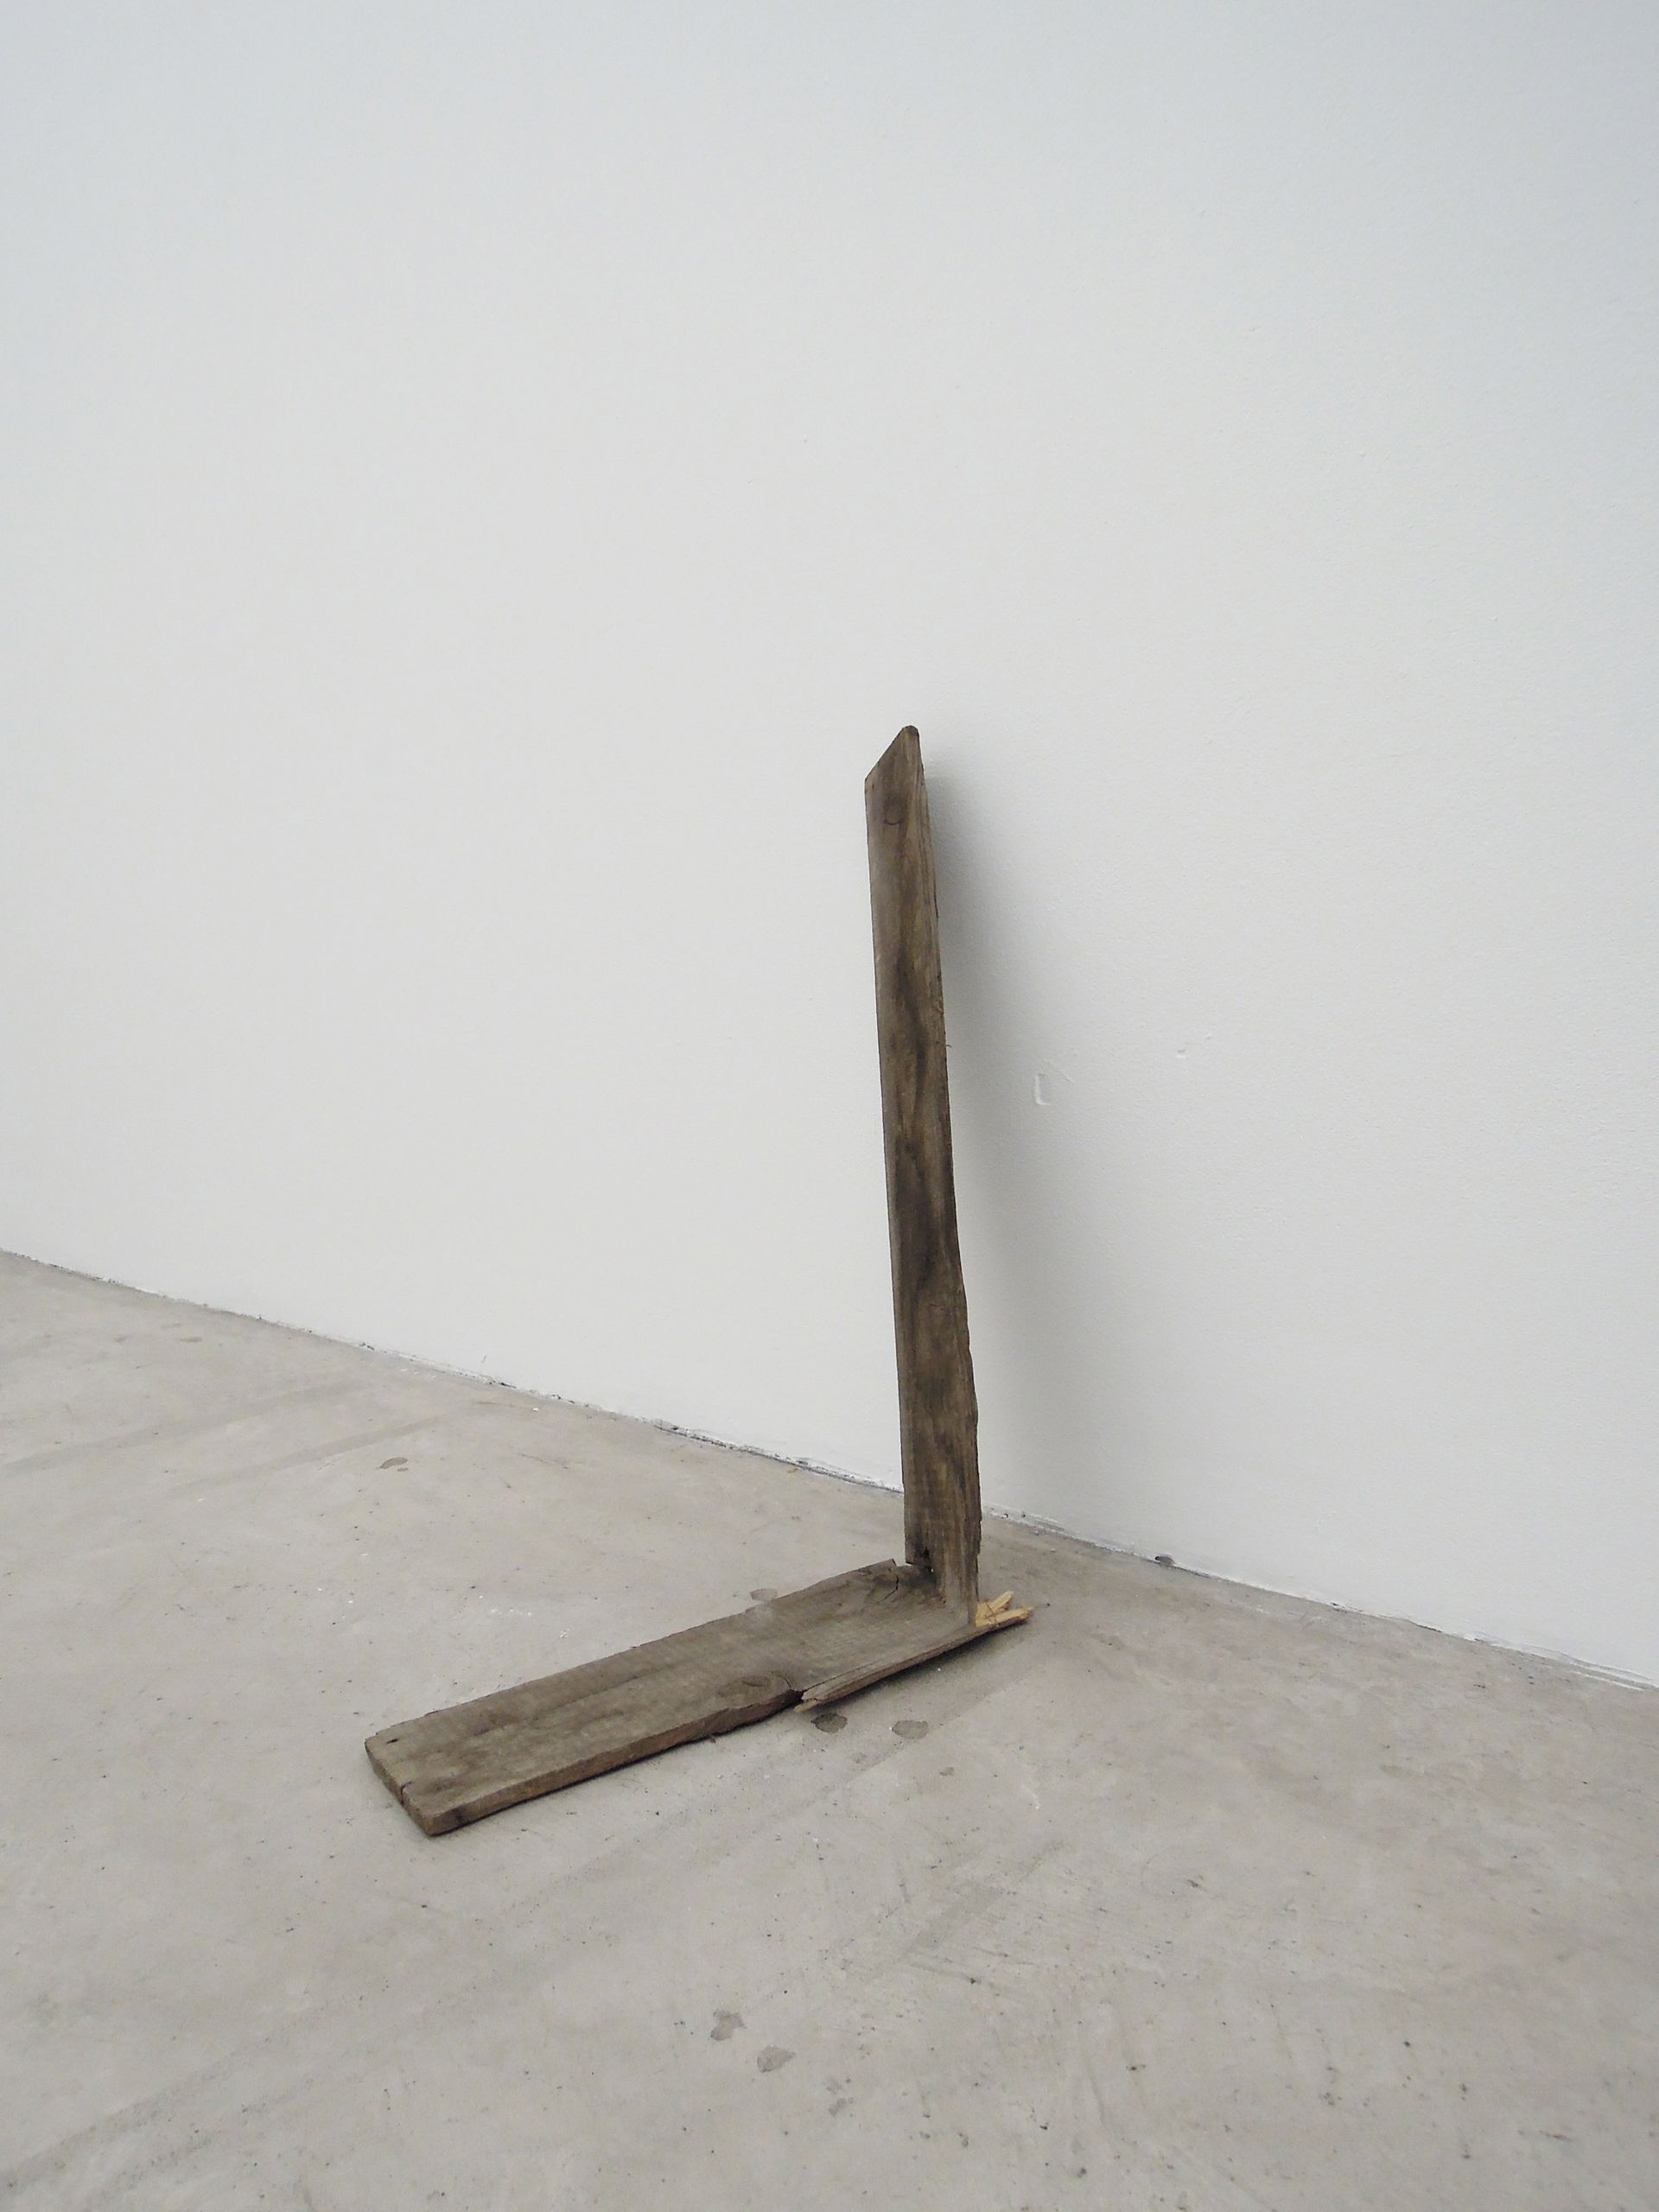 A valve for a spontaneous aggression (Lucerne), 2014, broken plank, dimensions variable